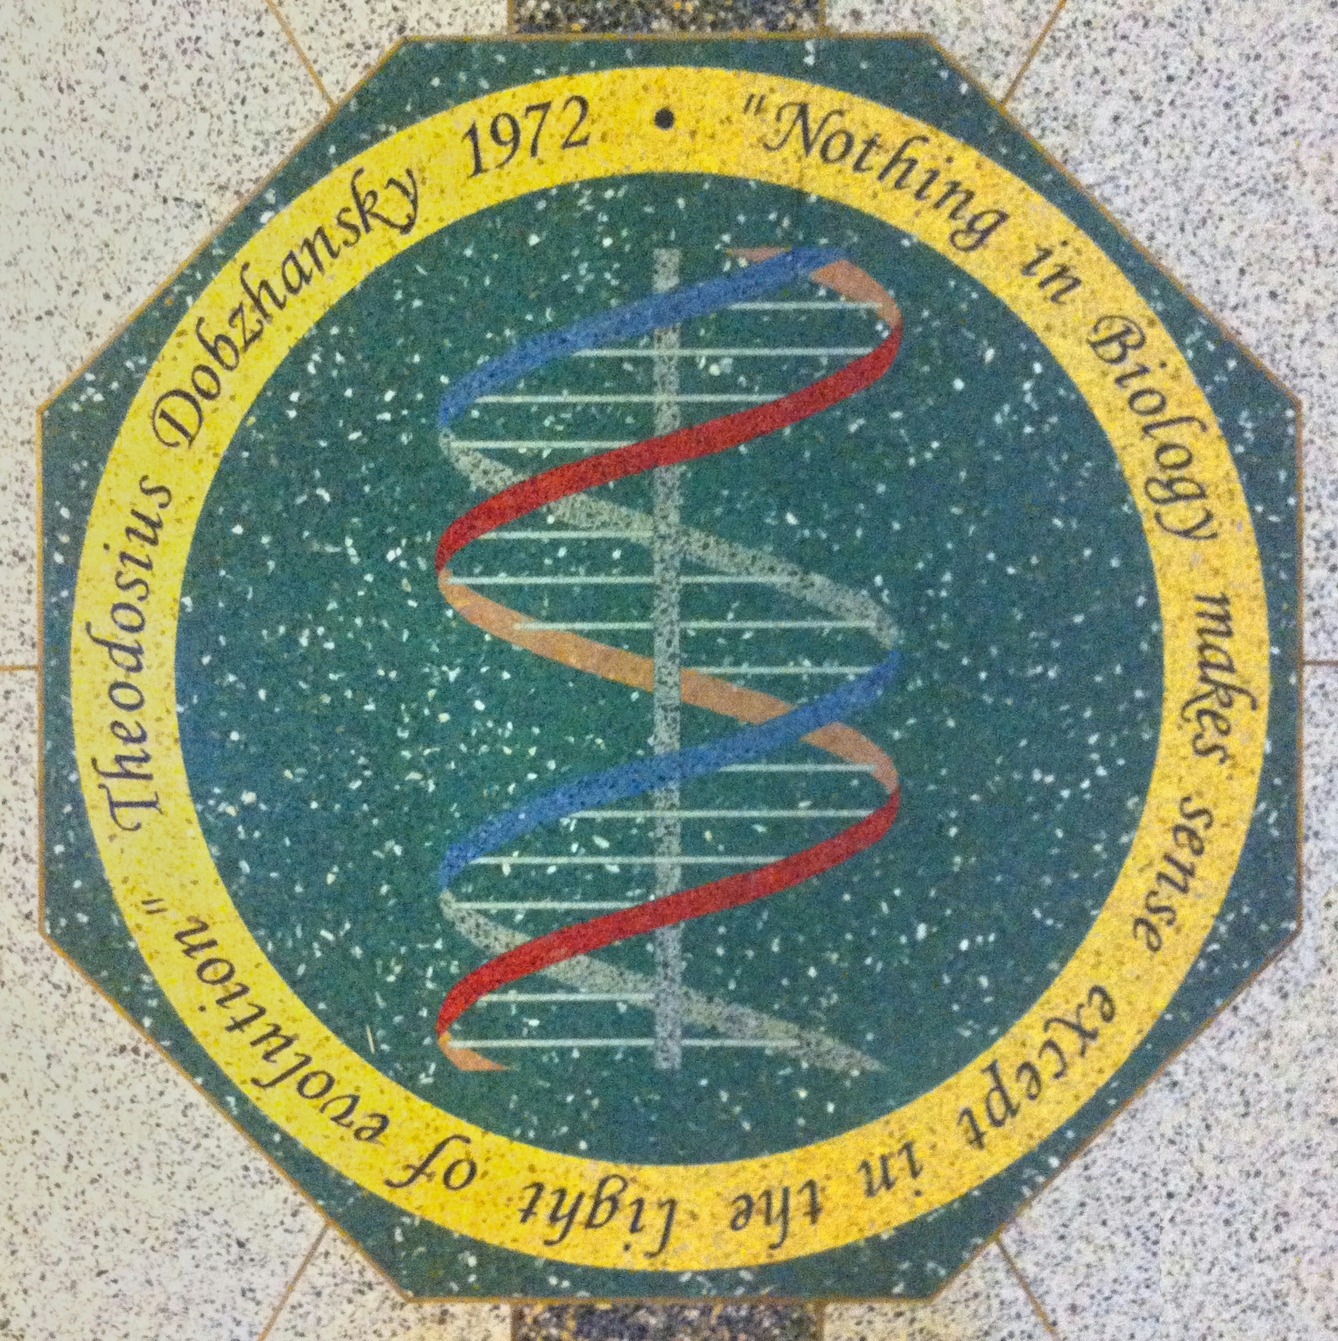 Mosaic medallion in the floor of the main hall of the Jordan Hall of Science, University of Notre Dame. Bears the quotation from Theodosius Dobzhansky (1900-1975): Nothing in Biology makes sense except in the light of evolution.